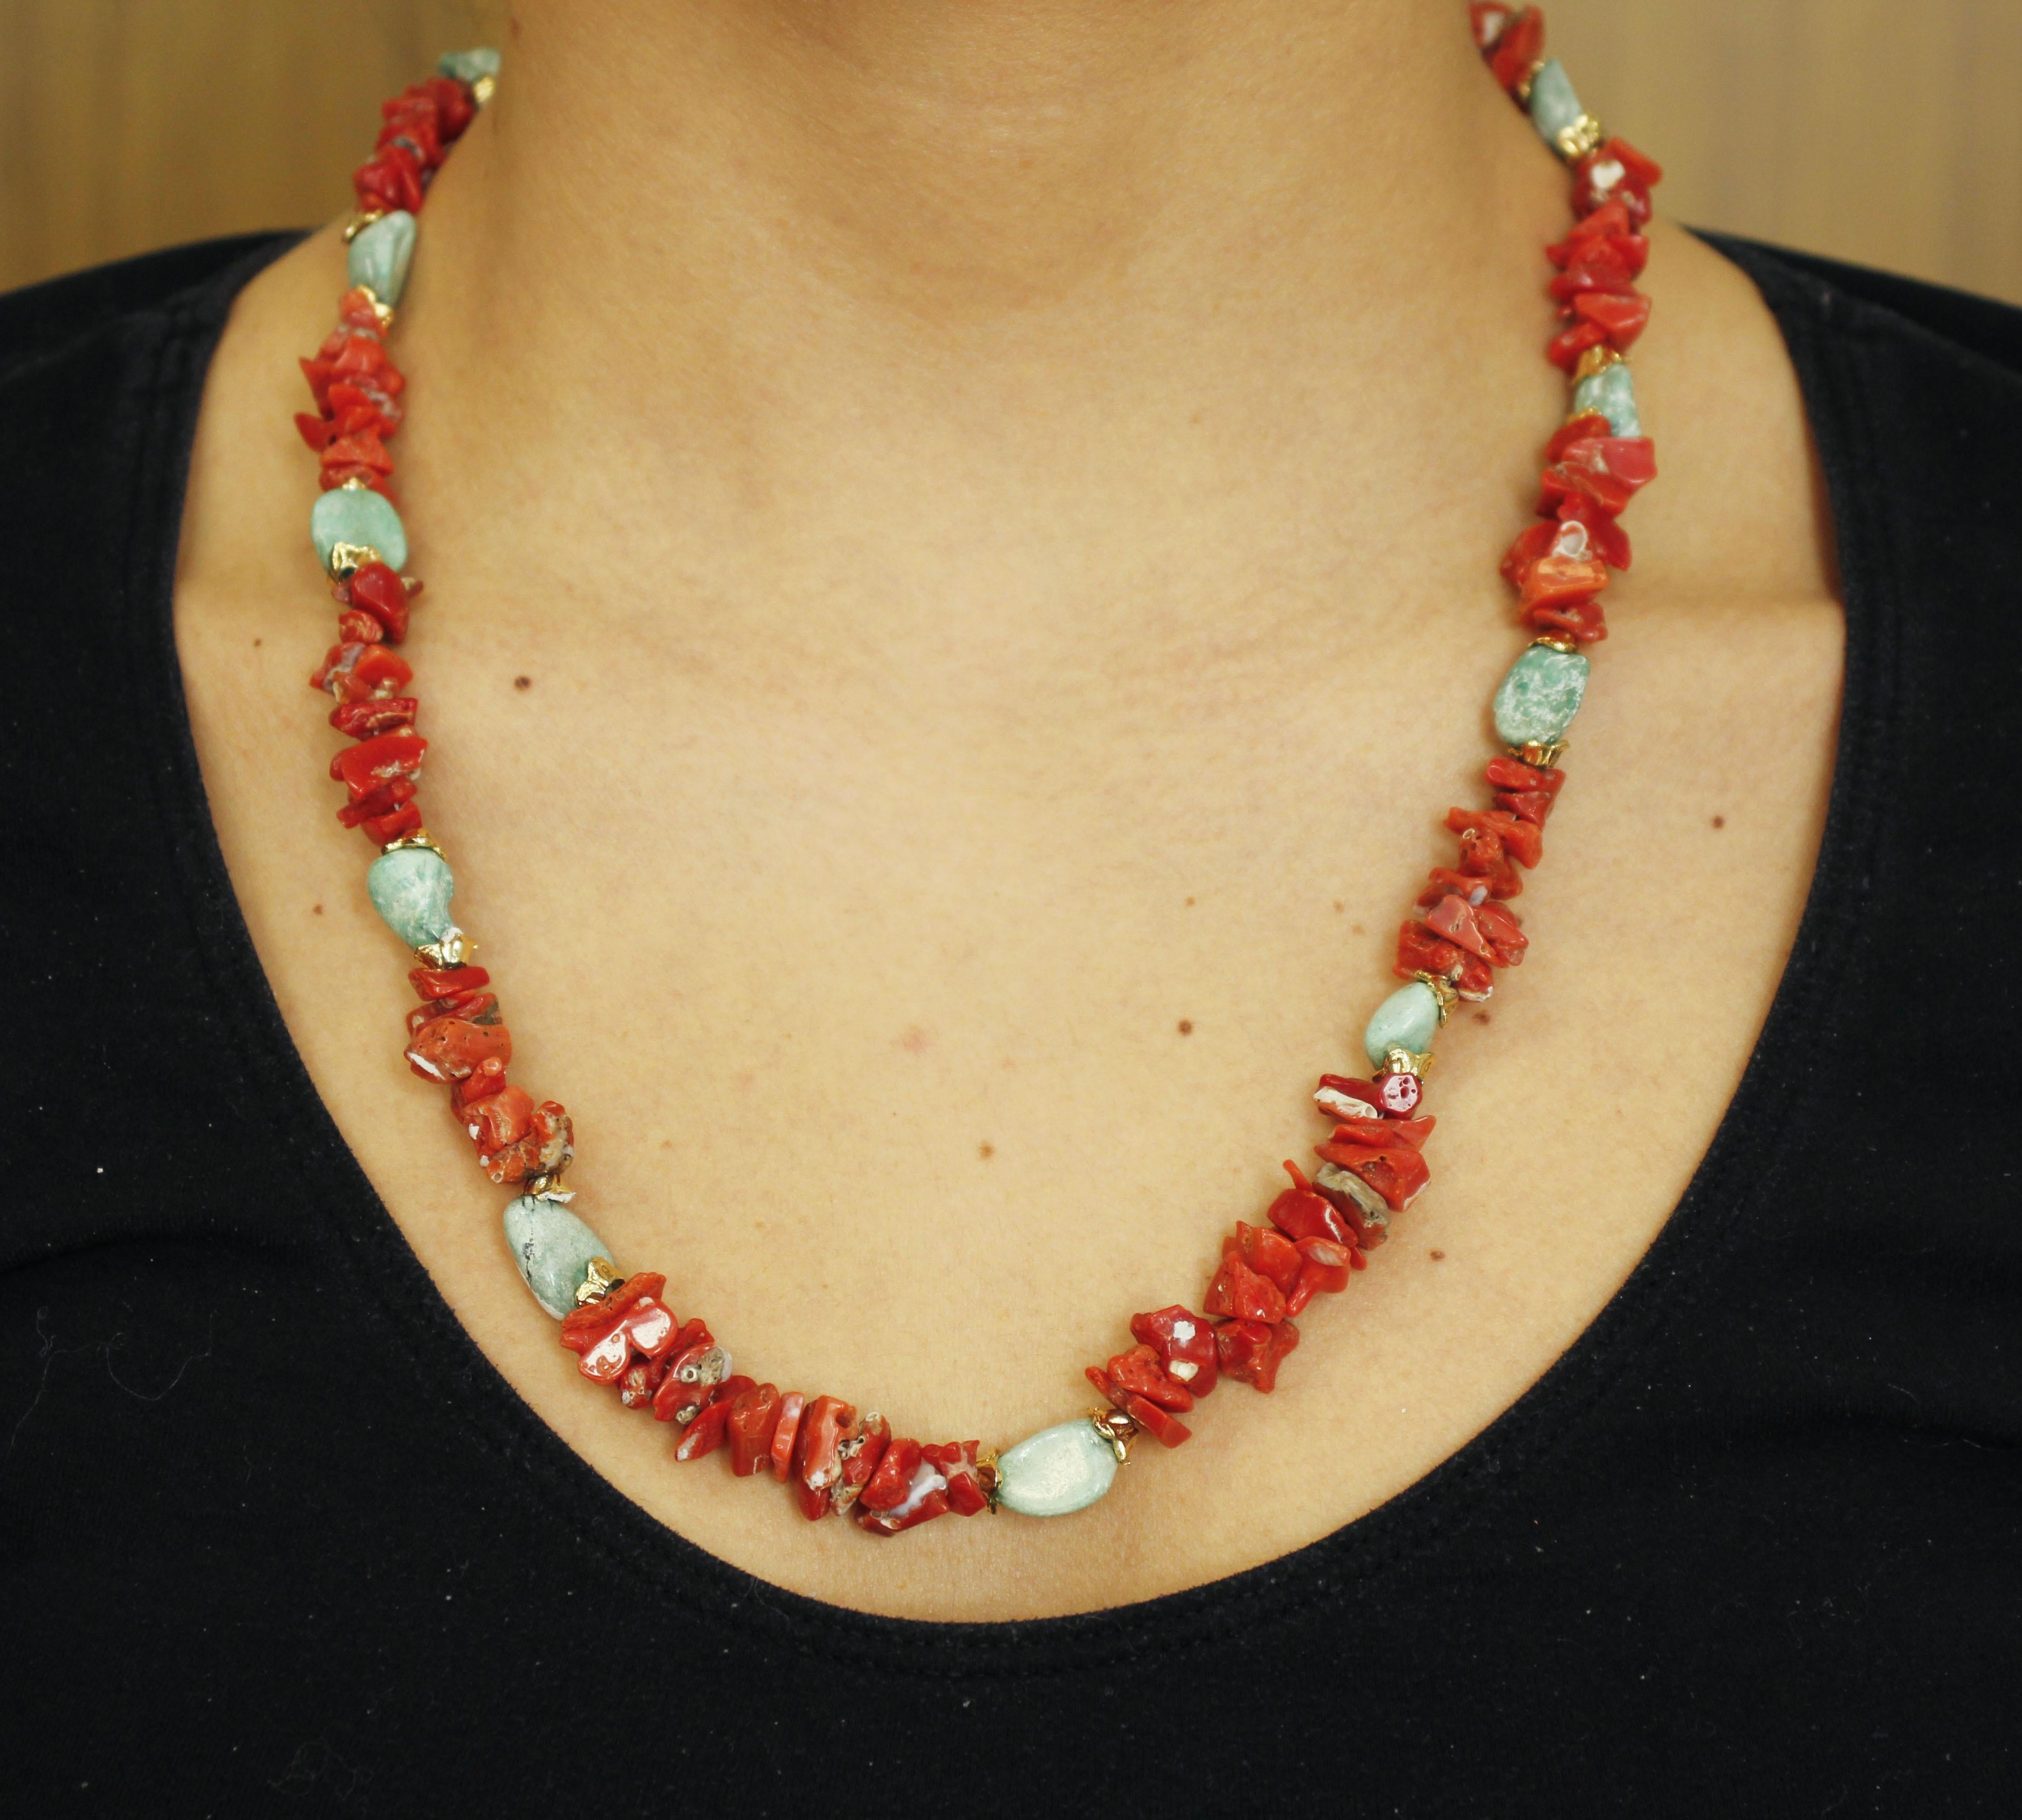 Round Cut Red Corals, Turquoise Stones, Rope / Multi-Strand Necklace